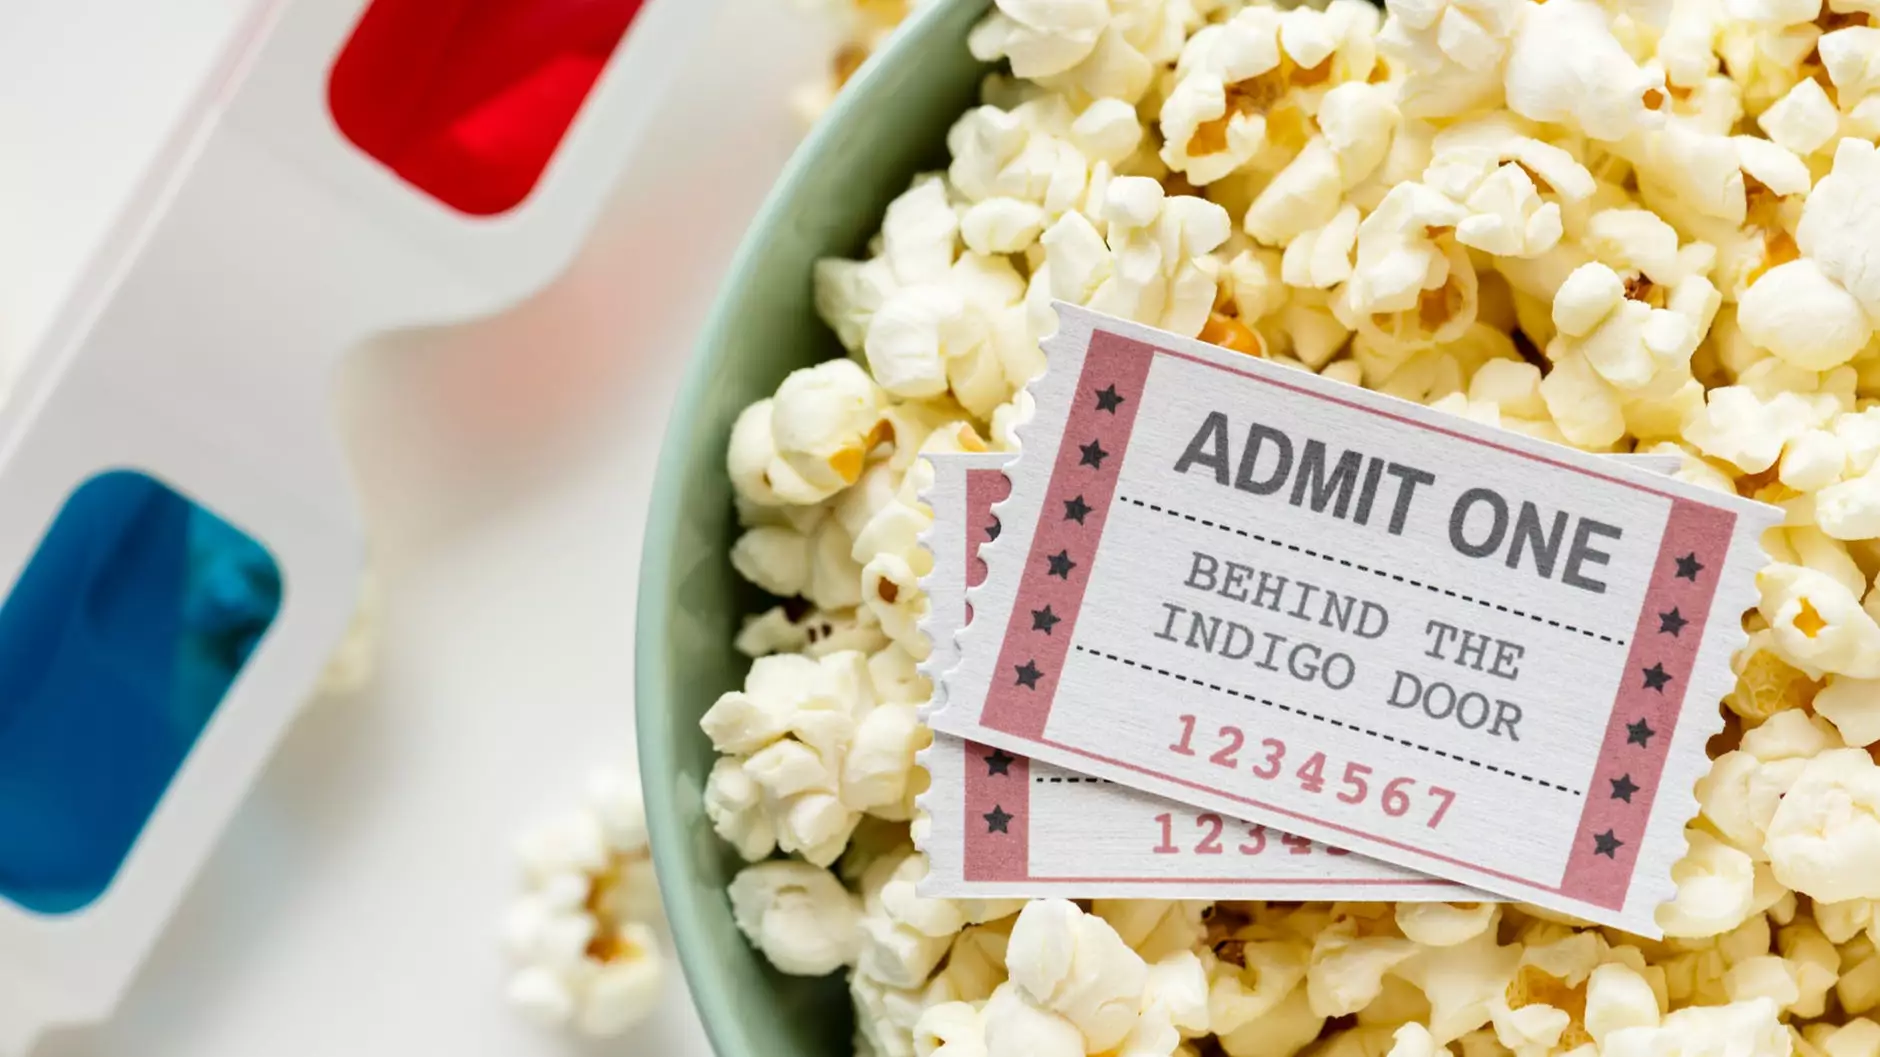 Woman Reveals Her Boyfriend's Very Strict Cinema Rules For 'Avengers: Endgame'